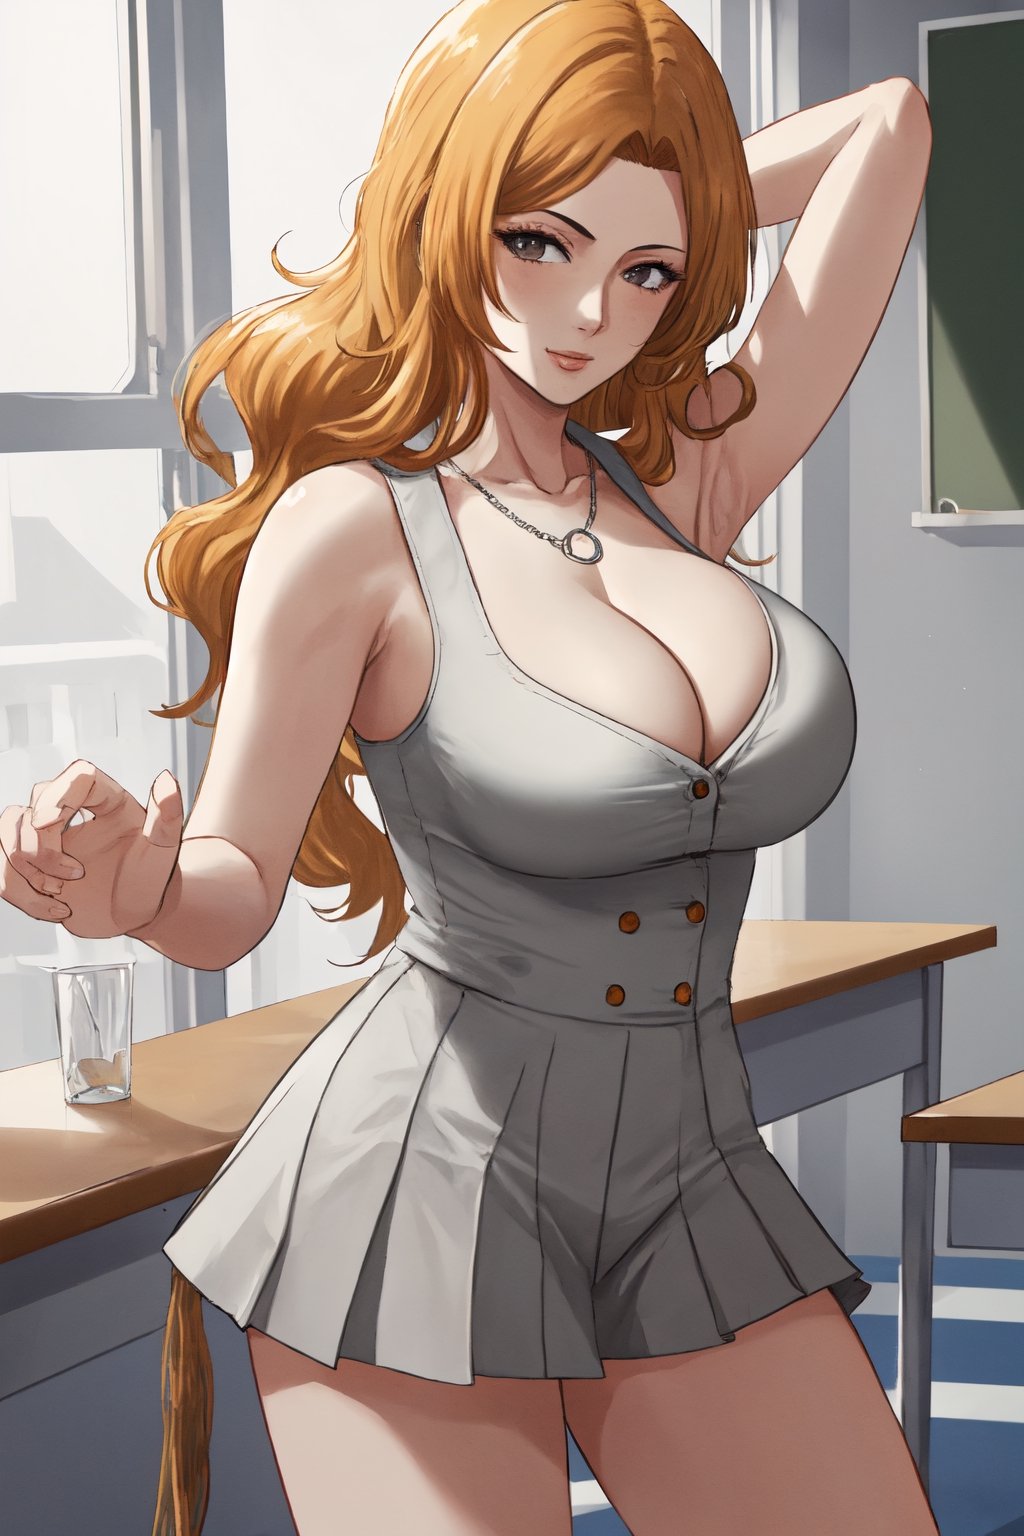 (masterpiece, best quality:1.2), solo, 1girl, matsumoto rangiku, looking at viewer, 
sleeveless White shirt with several buttons undone, White shirt, white buttons, White top,
Gray pleated short skirt, Gray skirt
smile, big large breasts, (big breasts:0.5), bare shoulders, a thin golden necklace tucked between her cleavage, Orange wavy long curly hair, shiny skin, perfect body, Reveal cleavage, 
(ultrahigh resolution textures), in dynamic pose, bokeh, (intricate details, hyperdetailed:1.15), detailed, HDR+, showing armpit,
school classroom interior background, matsumoto rangiku,MeikoDef, Xter